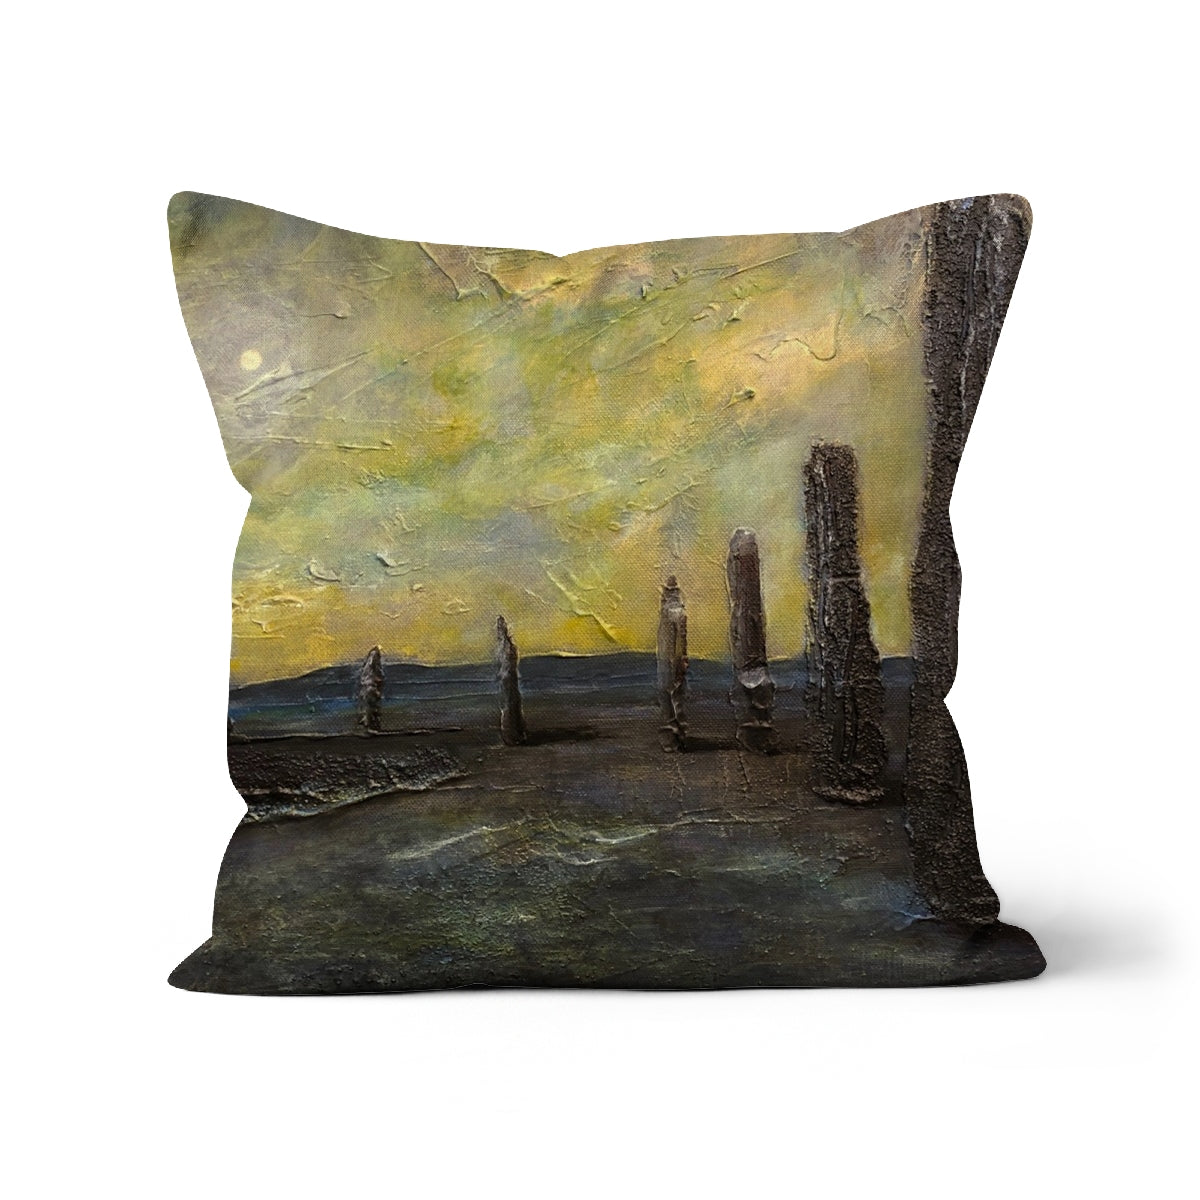 An Ethereal Ring Of Brodgar Art Gifts Cushion-Cushions-Orkney Art Gallery-Faux Suede-12"x12"-Paintings, Prints, Homeware, Art Gifts From Scotland By Scottish Artist Kevin Hunter